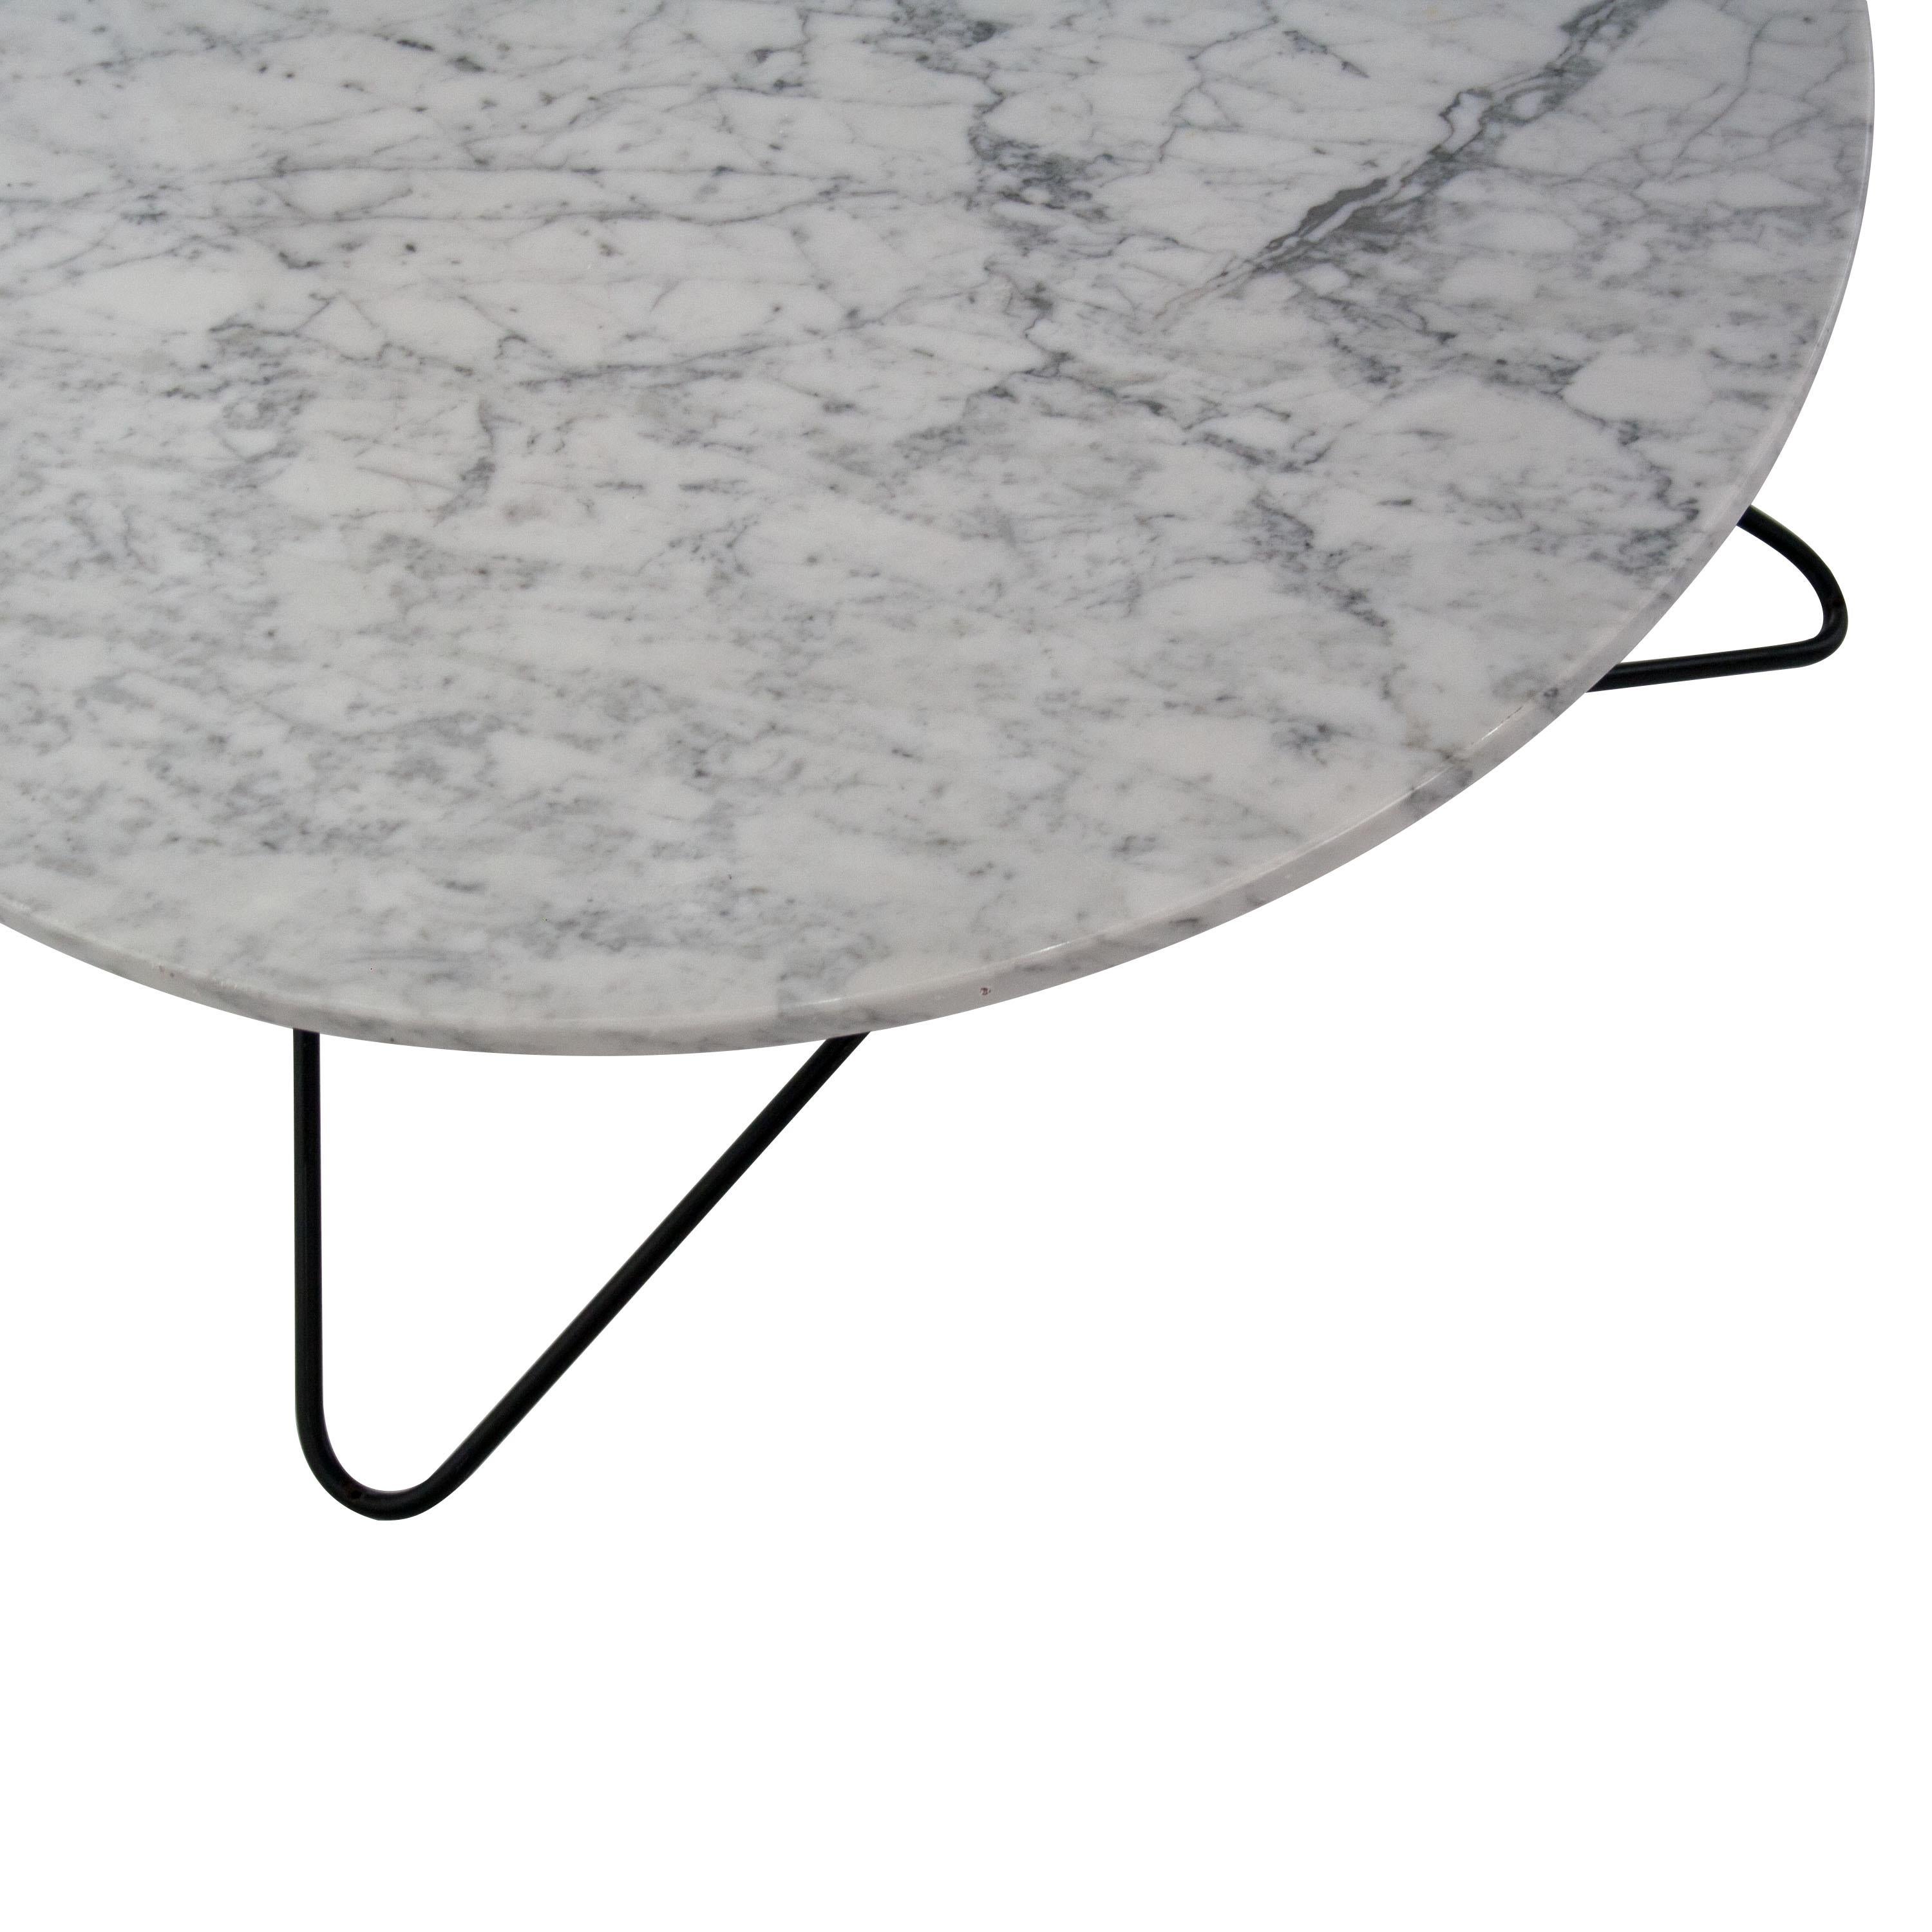 Lacquered Mid-Century Modern Rounded Marble Center Table, Italy, 1950